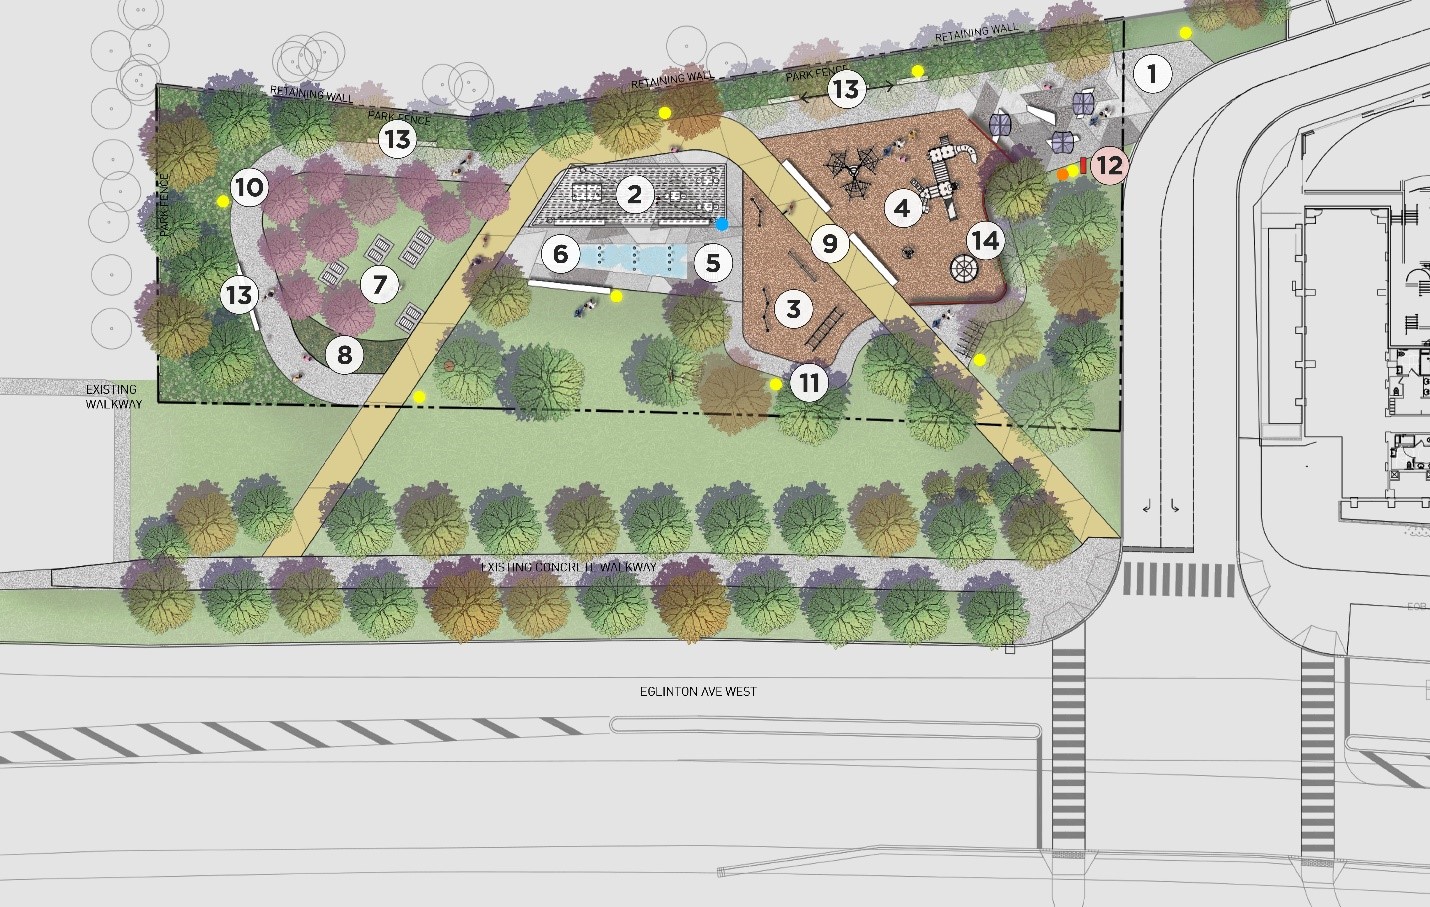 Preferred concept plan showing the park design. A walking path is proposed on the west side of the park, there is a centrally located plaza with shade structure and interactive water feature, to the east of the plaza is a fitness area and playground with equipment. Planting is integrated throughout, and pathways connect to all programming elements.